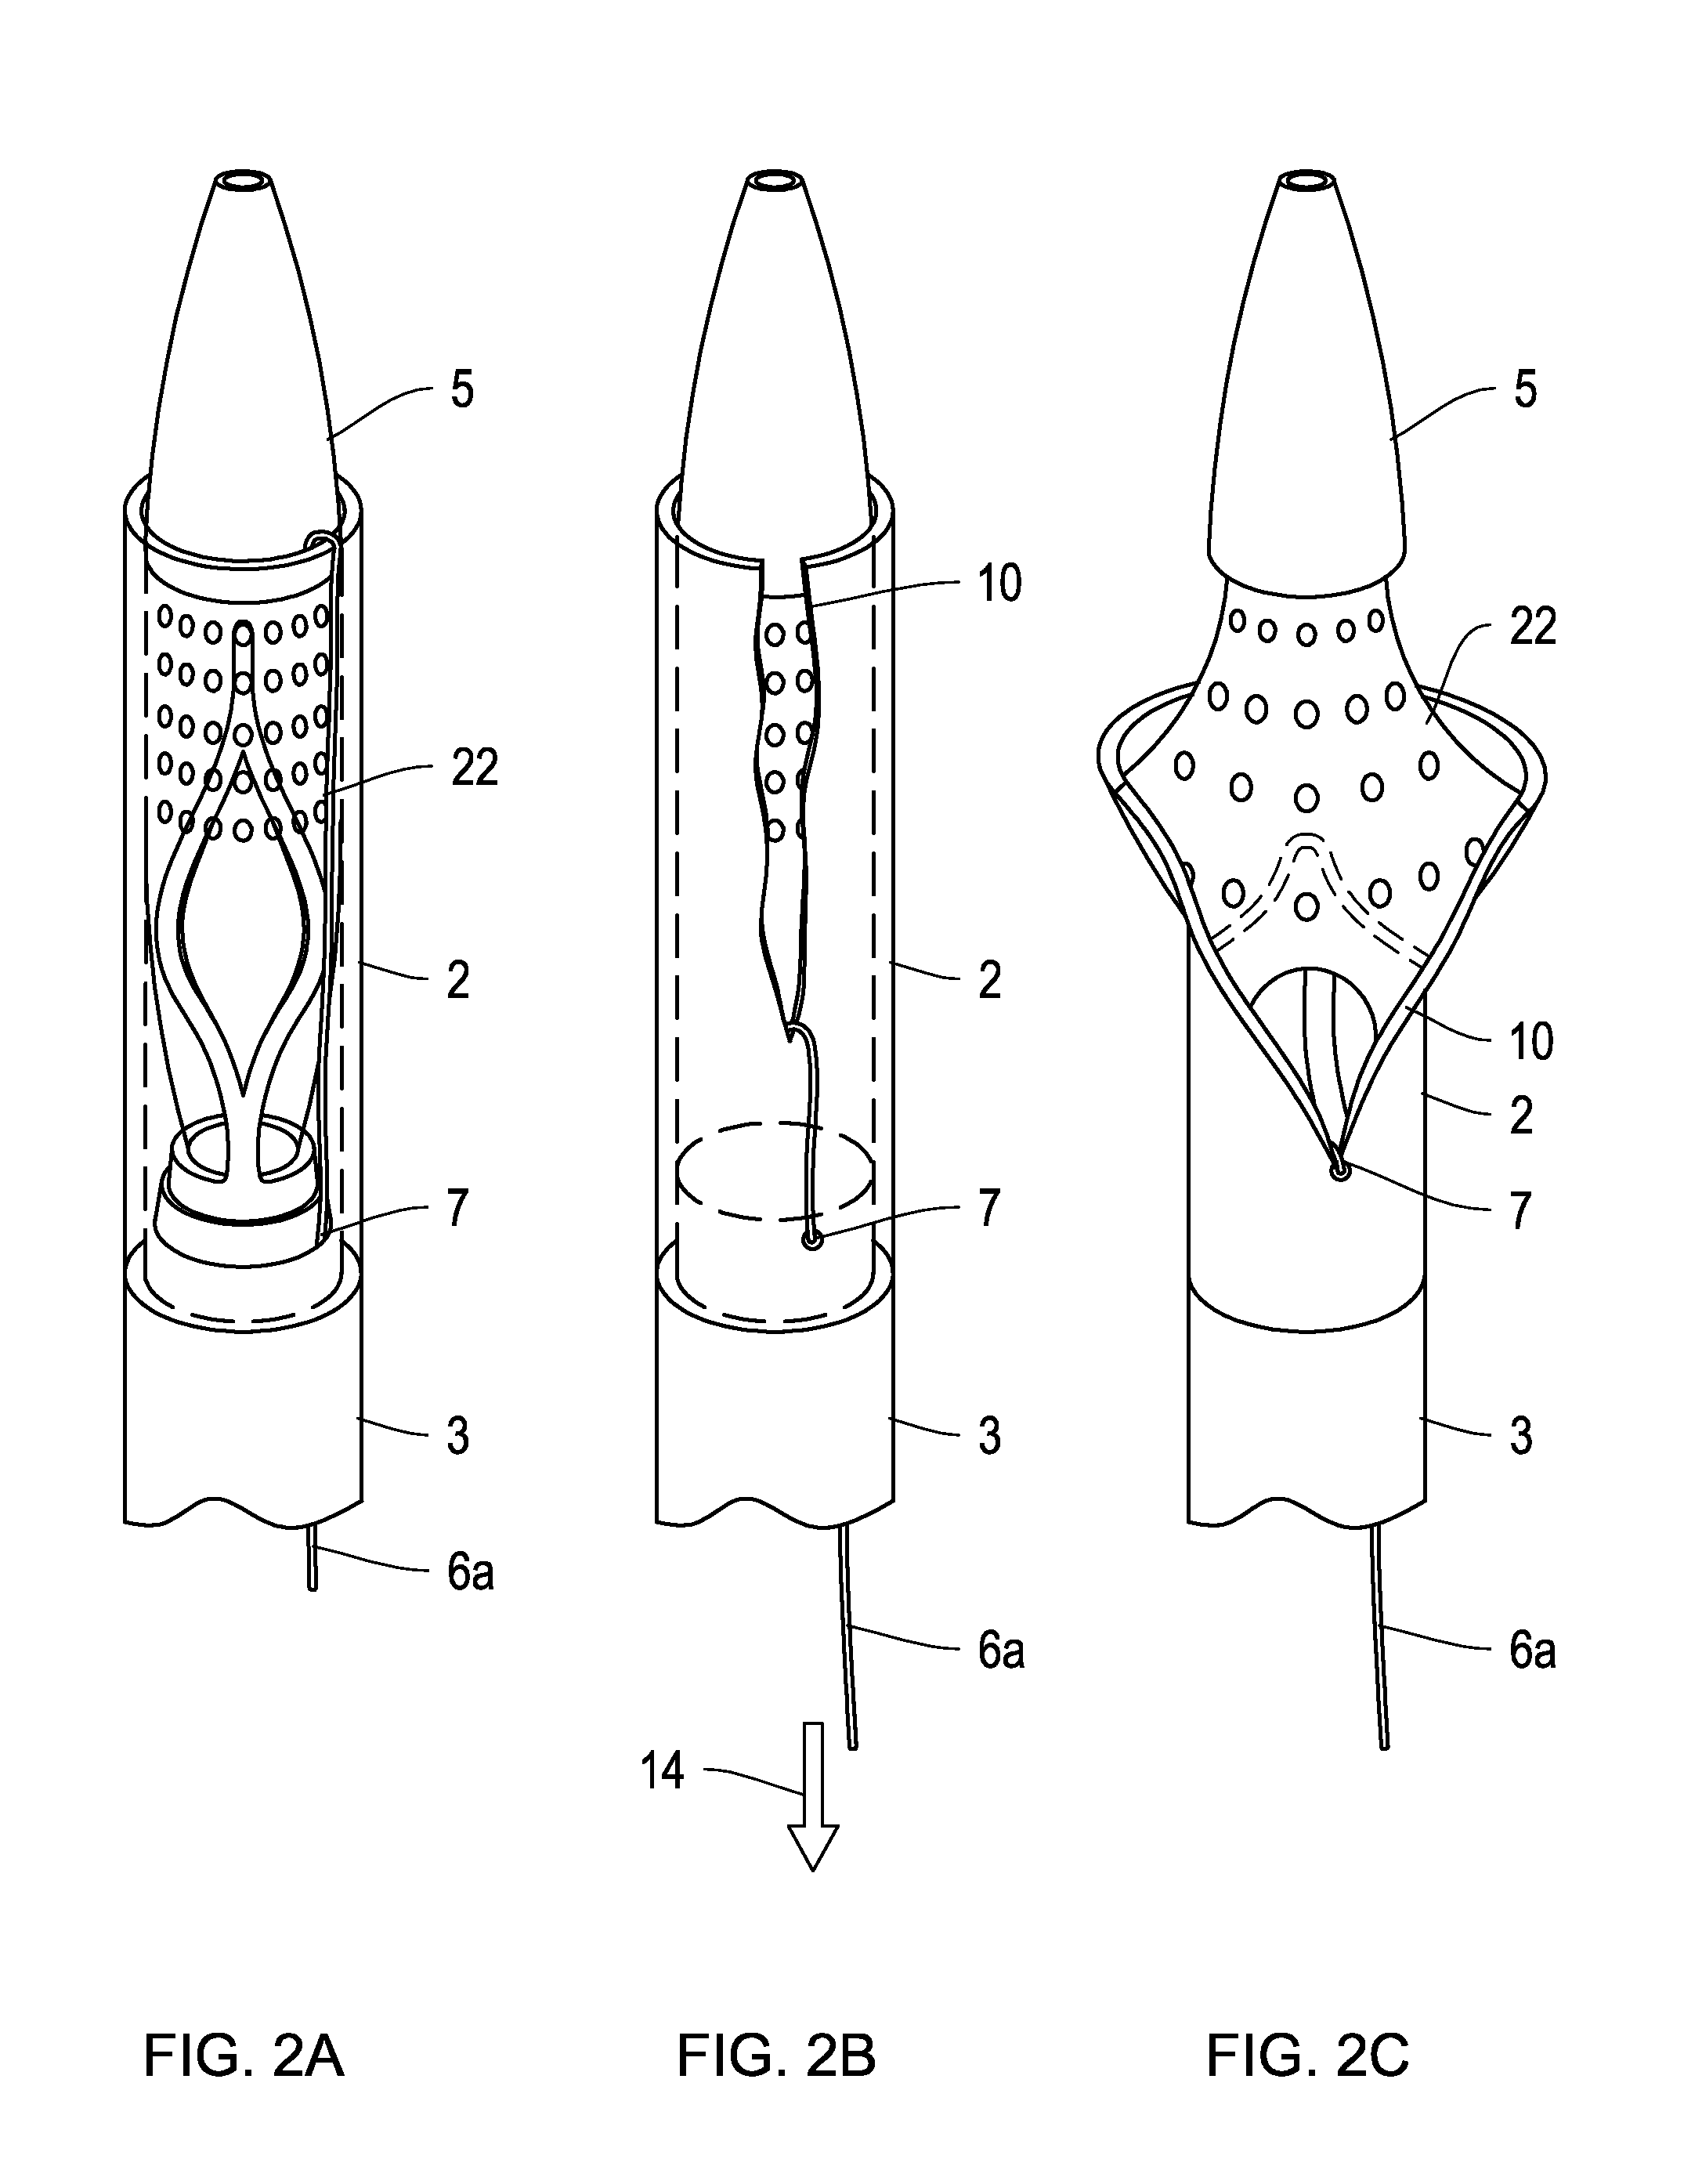 Delivery catheter with constraining sheath and methods of deploying medical devices into a body lumen